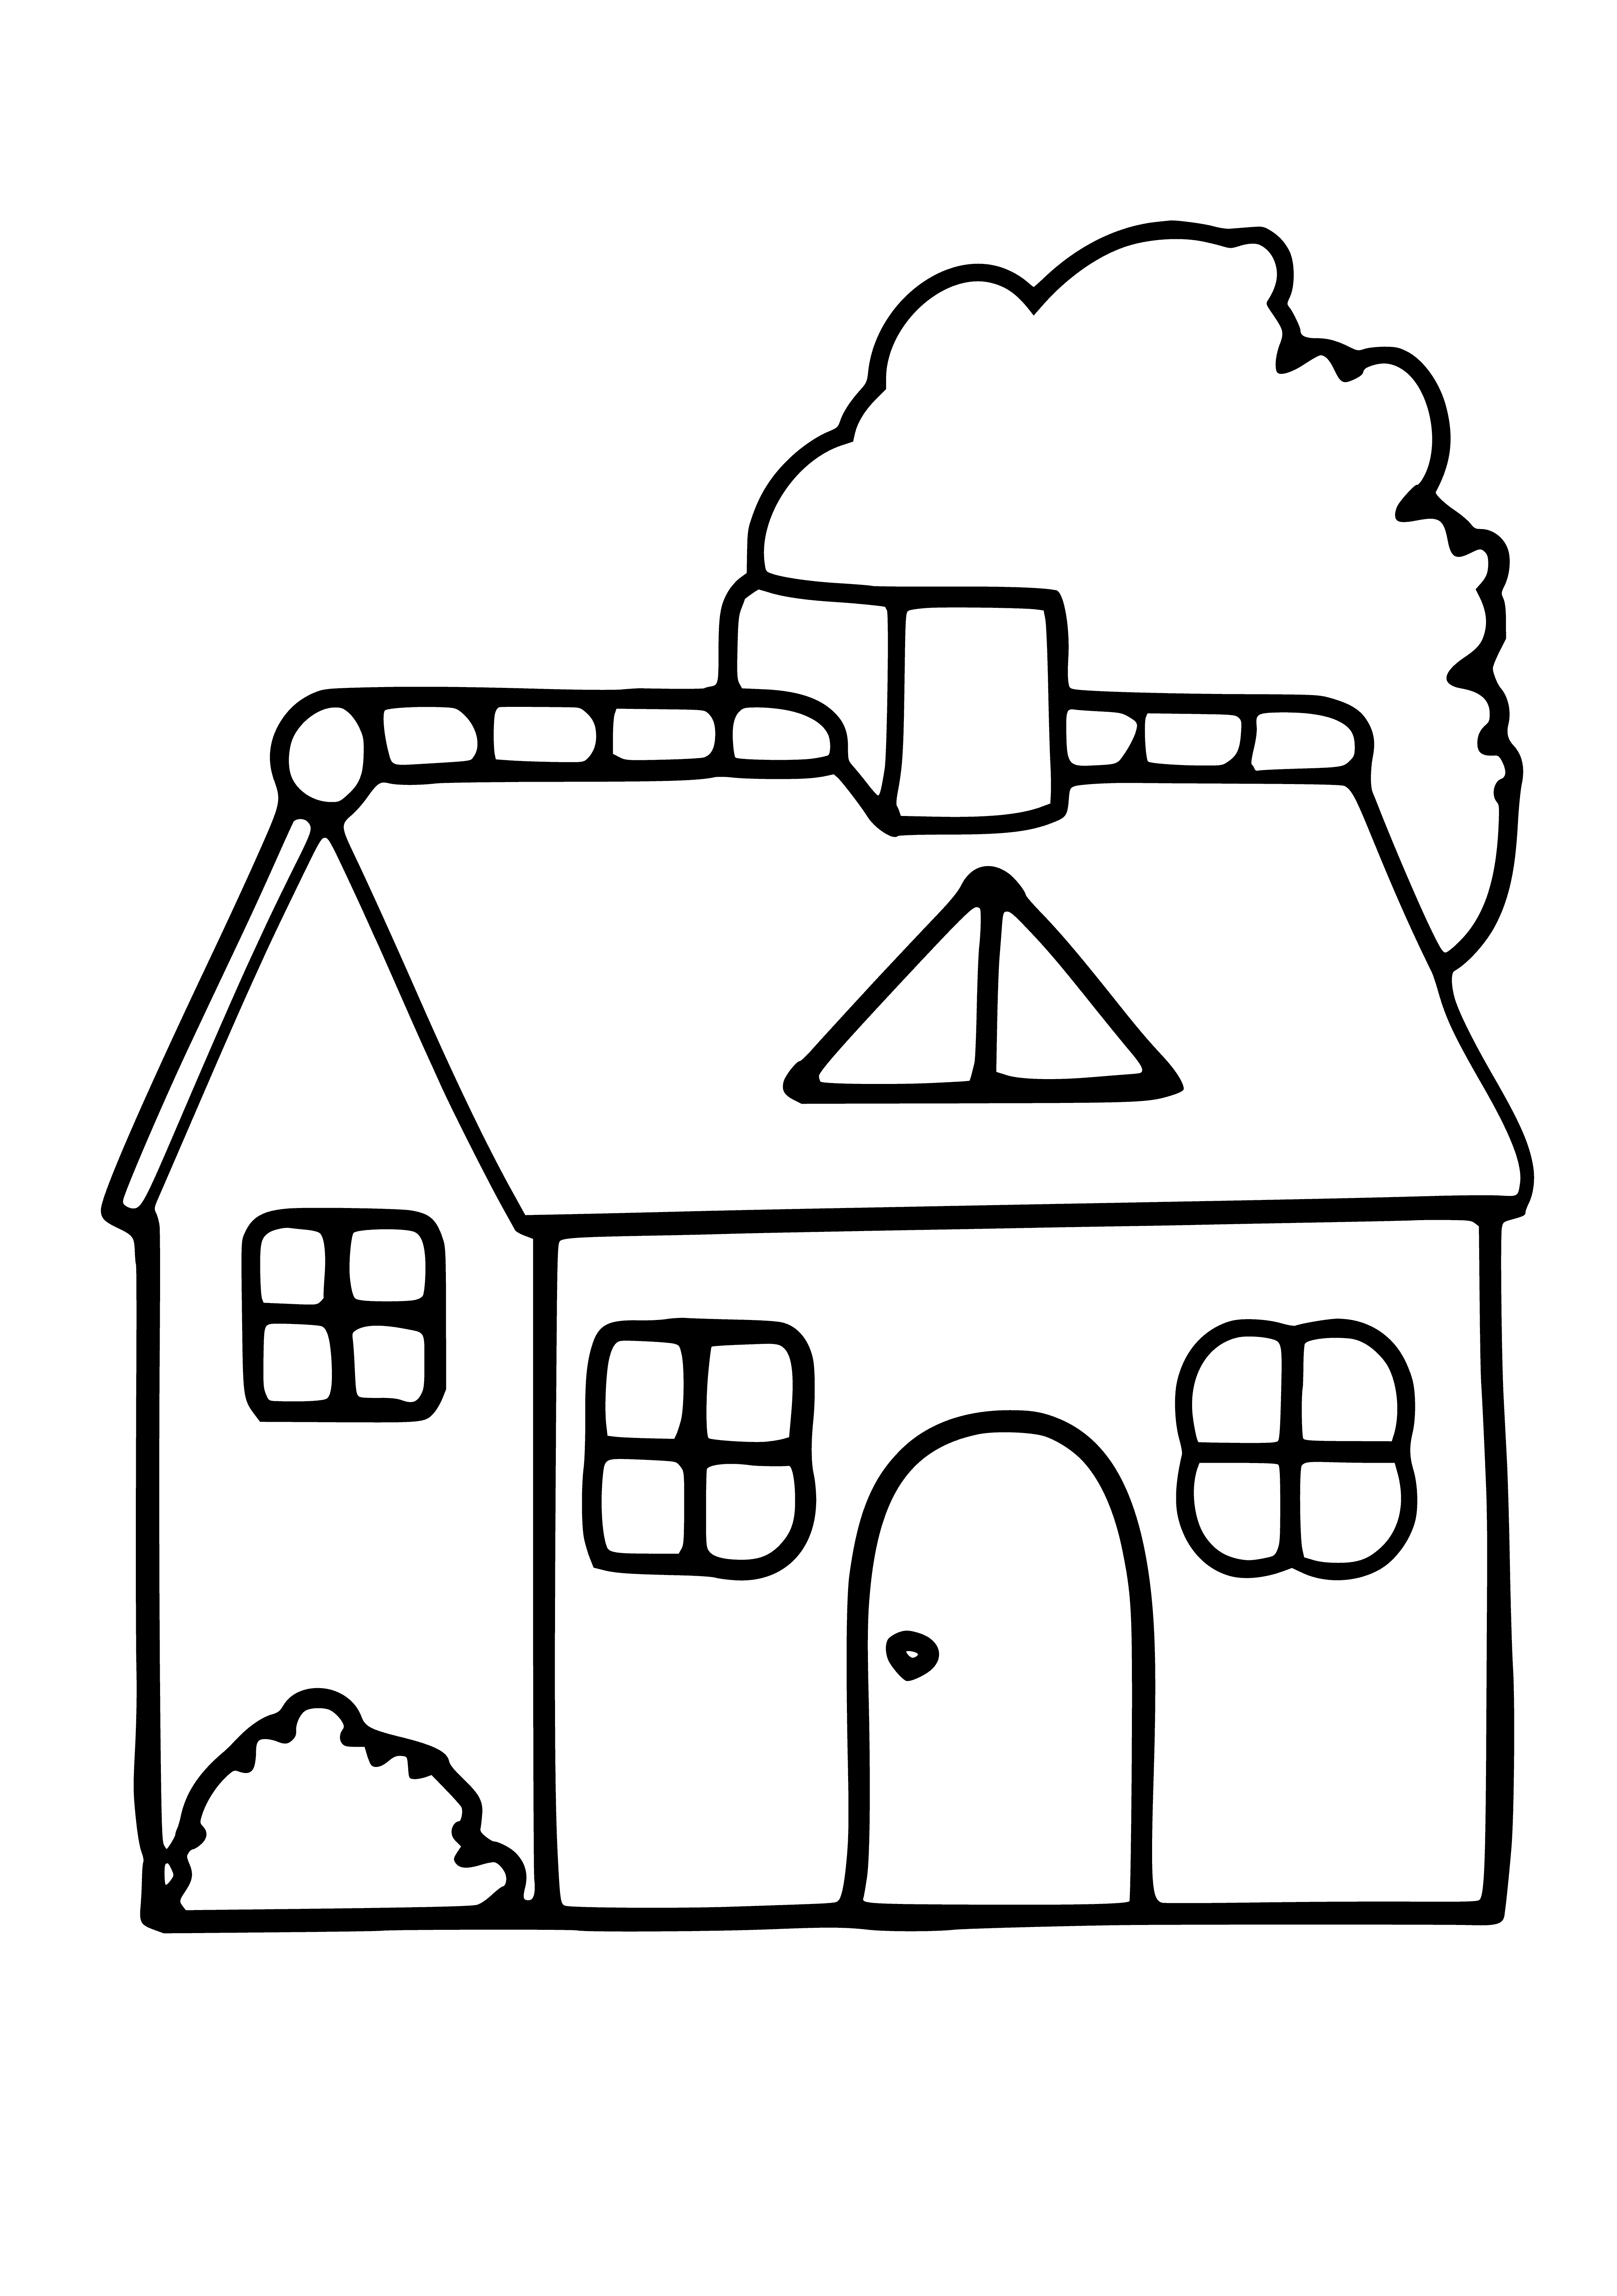 House coloring page